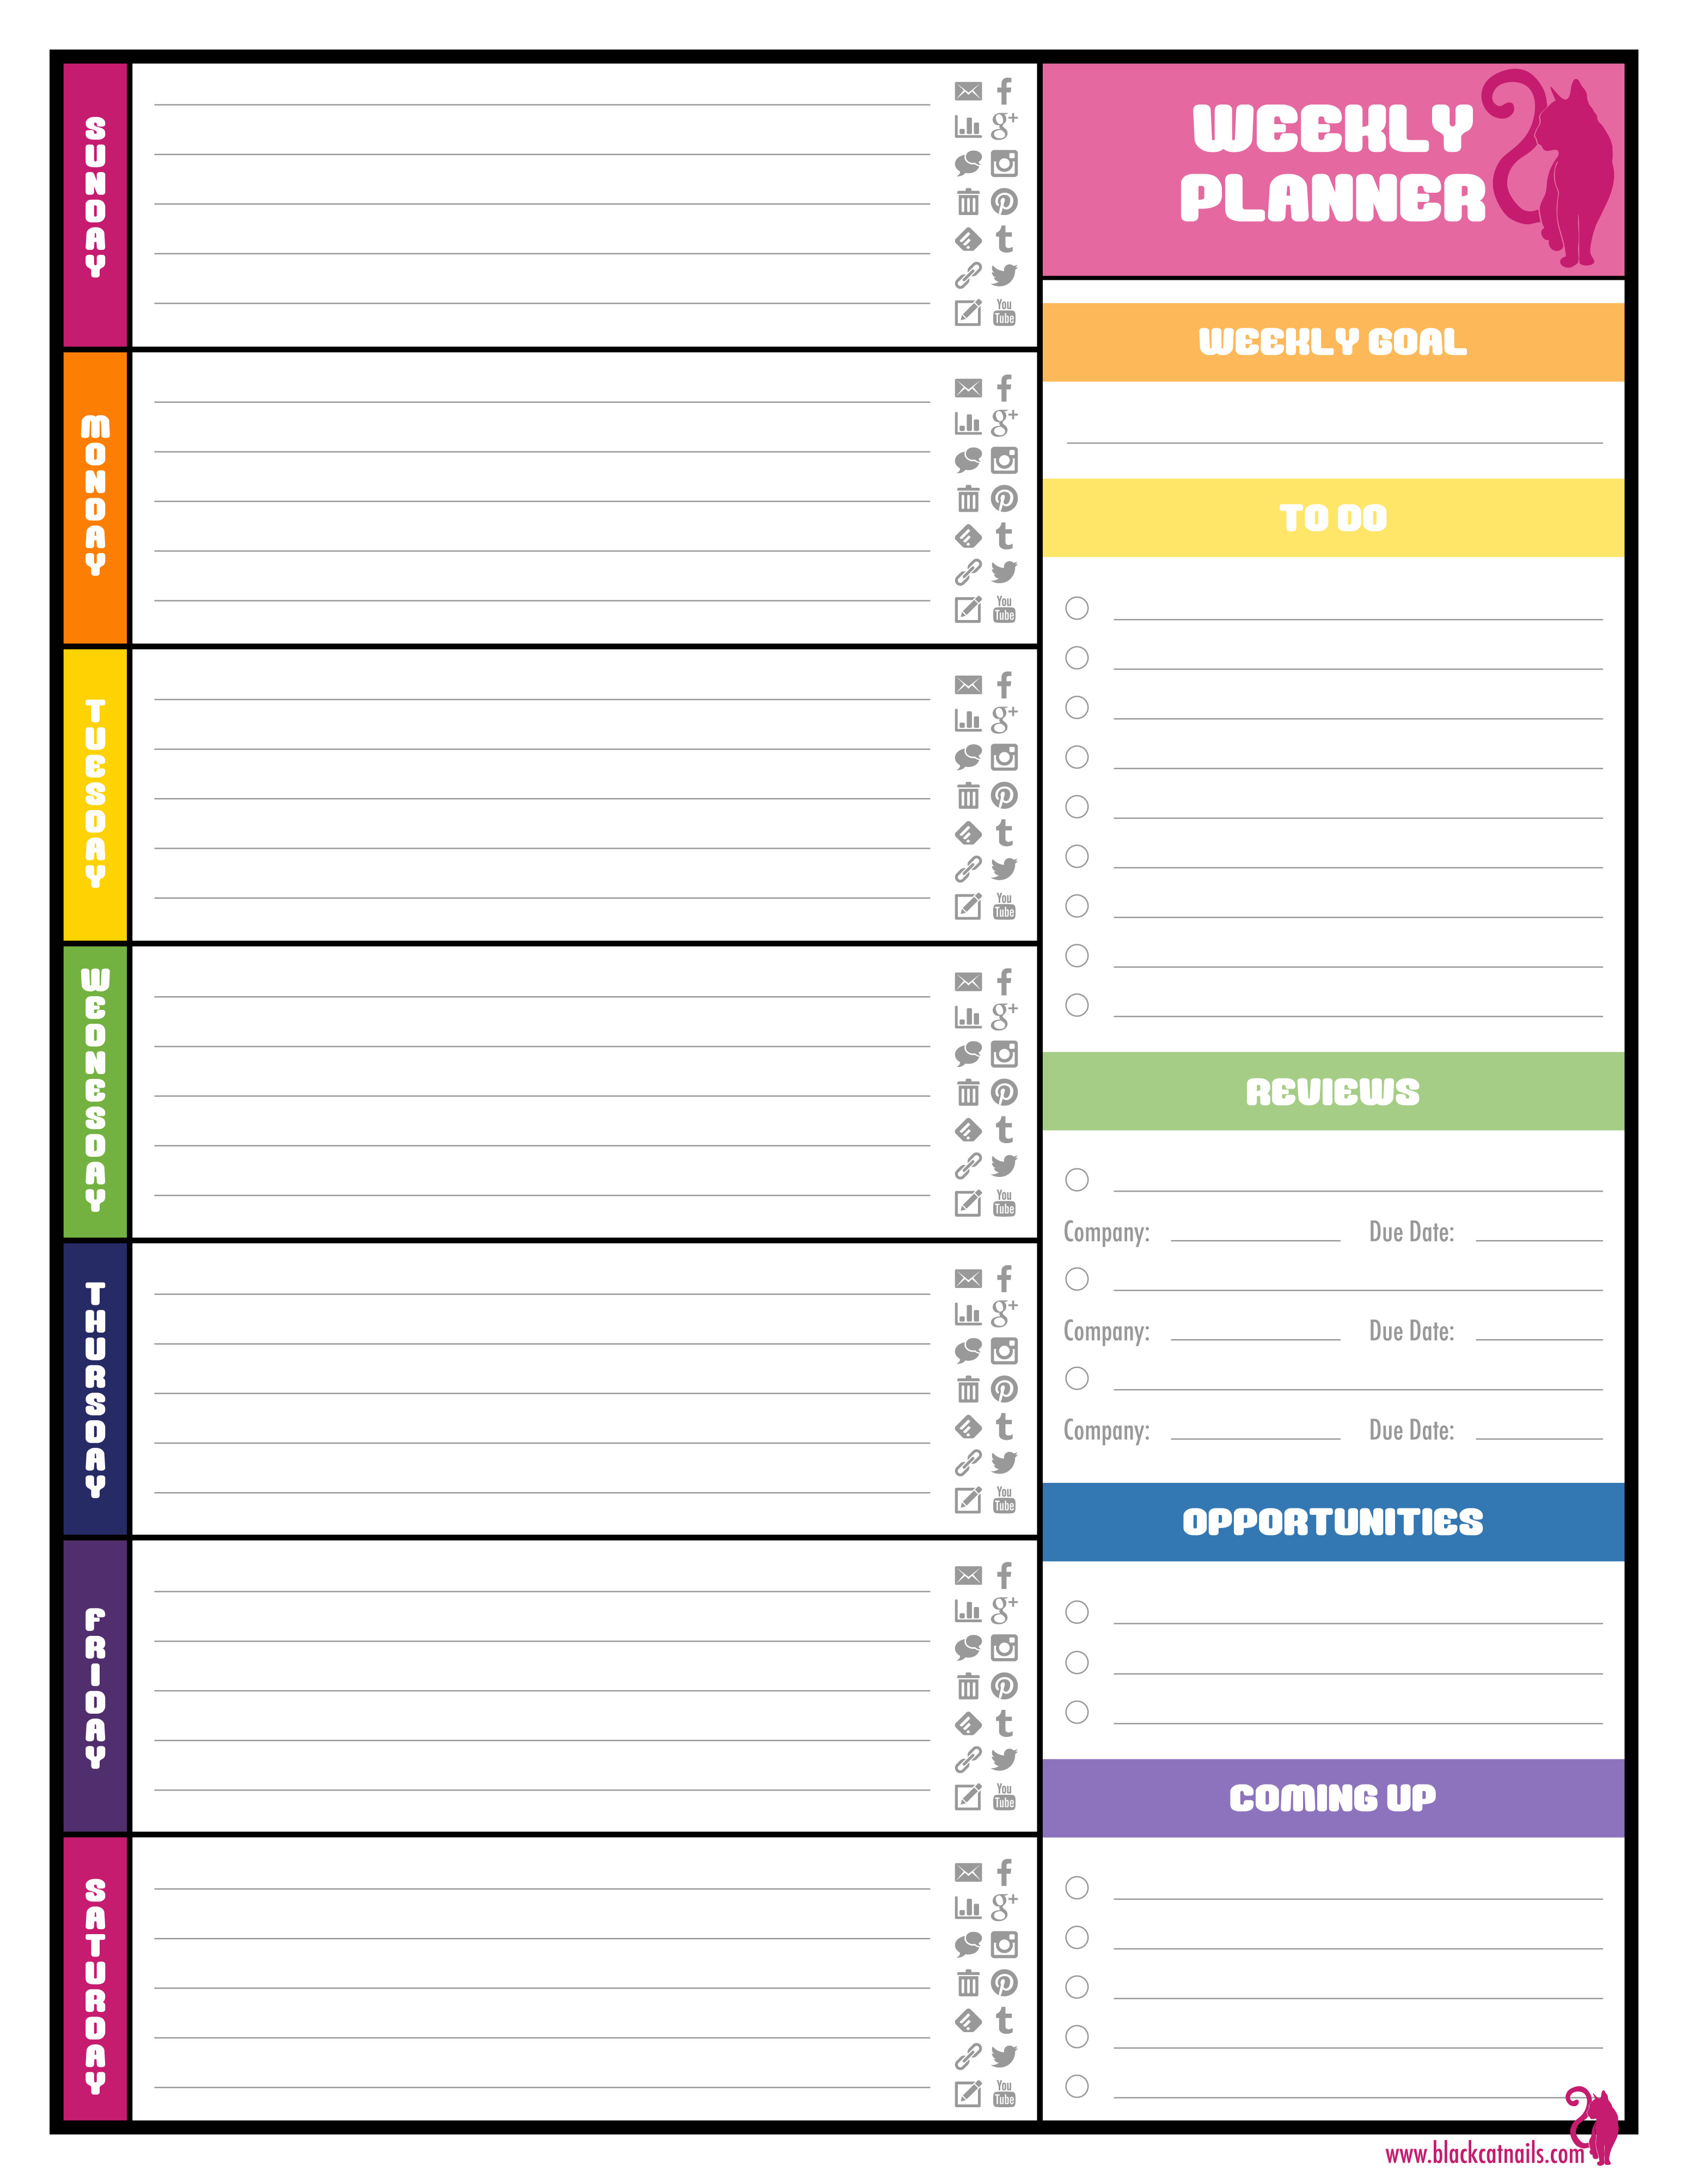 Colorful Weekly Blogging Planner Image